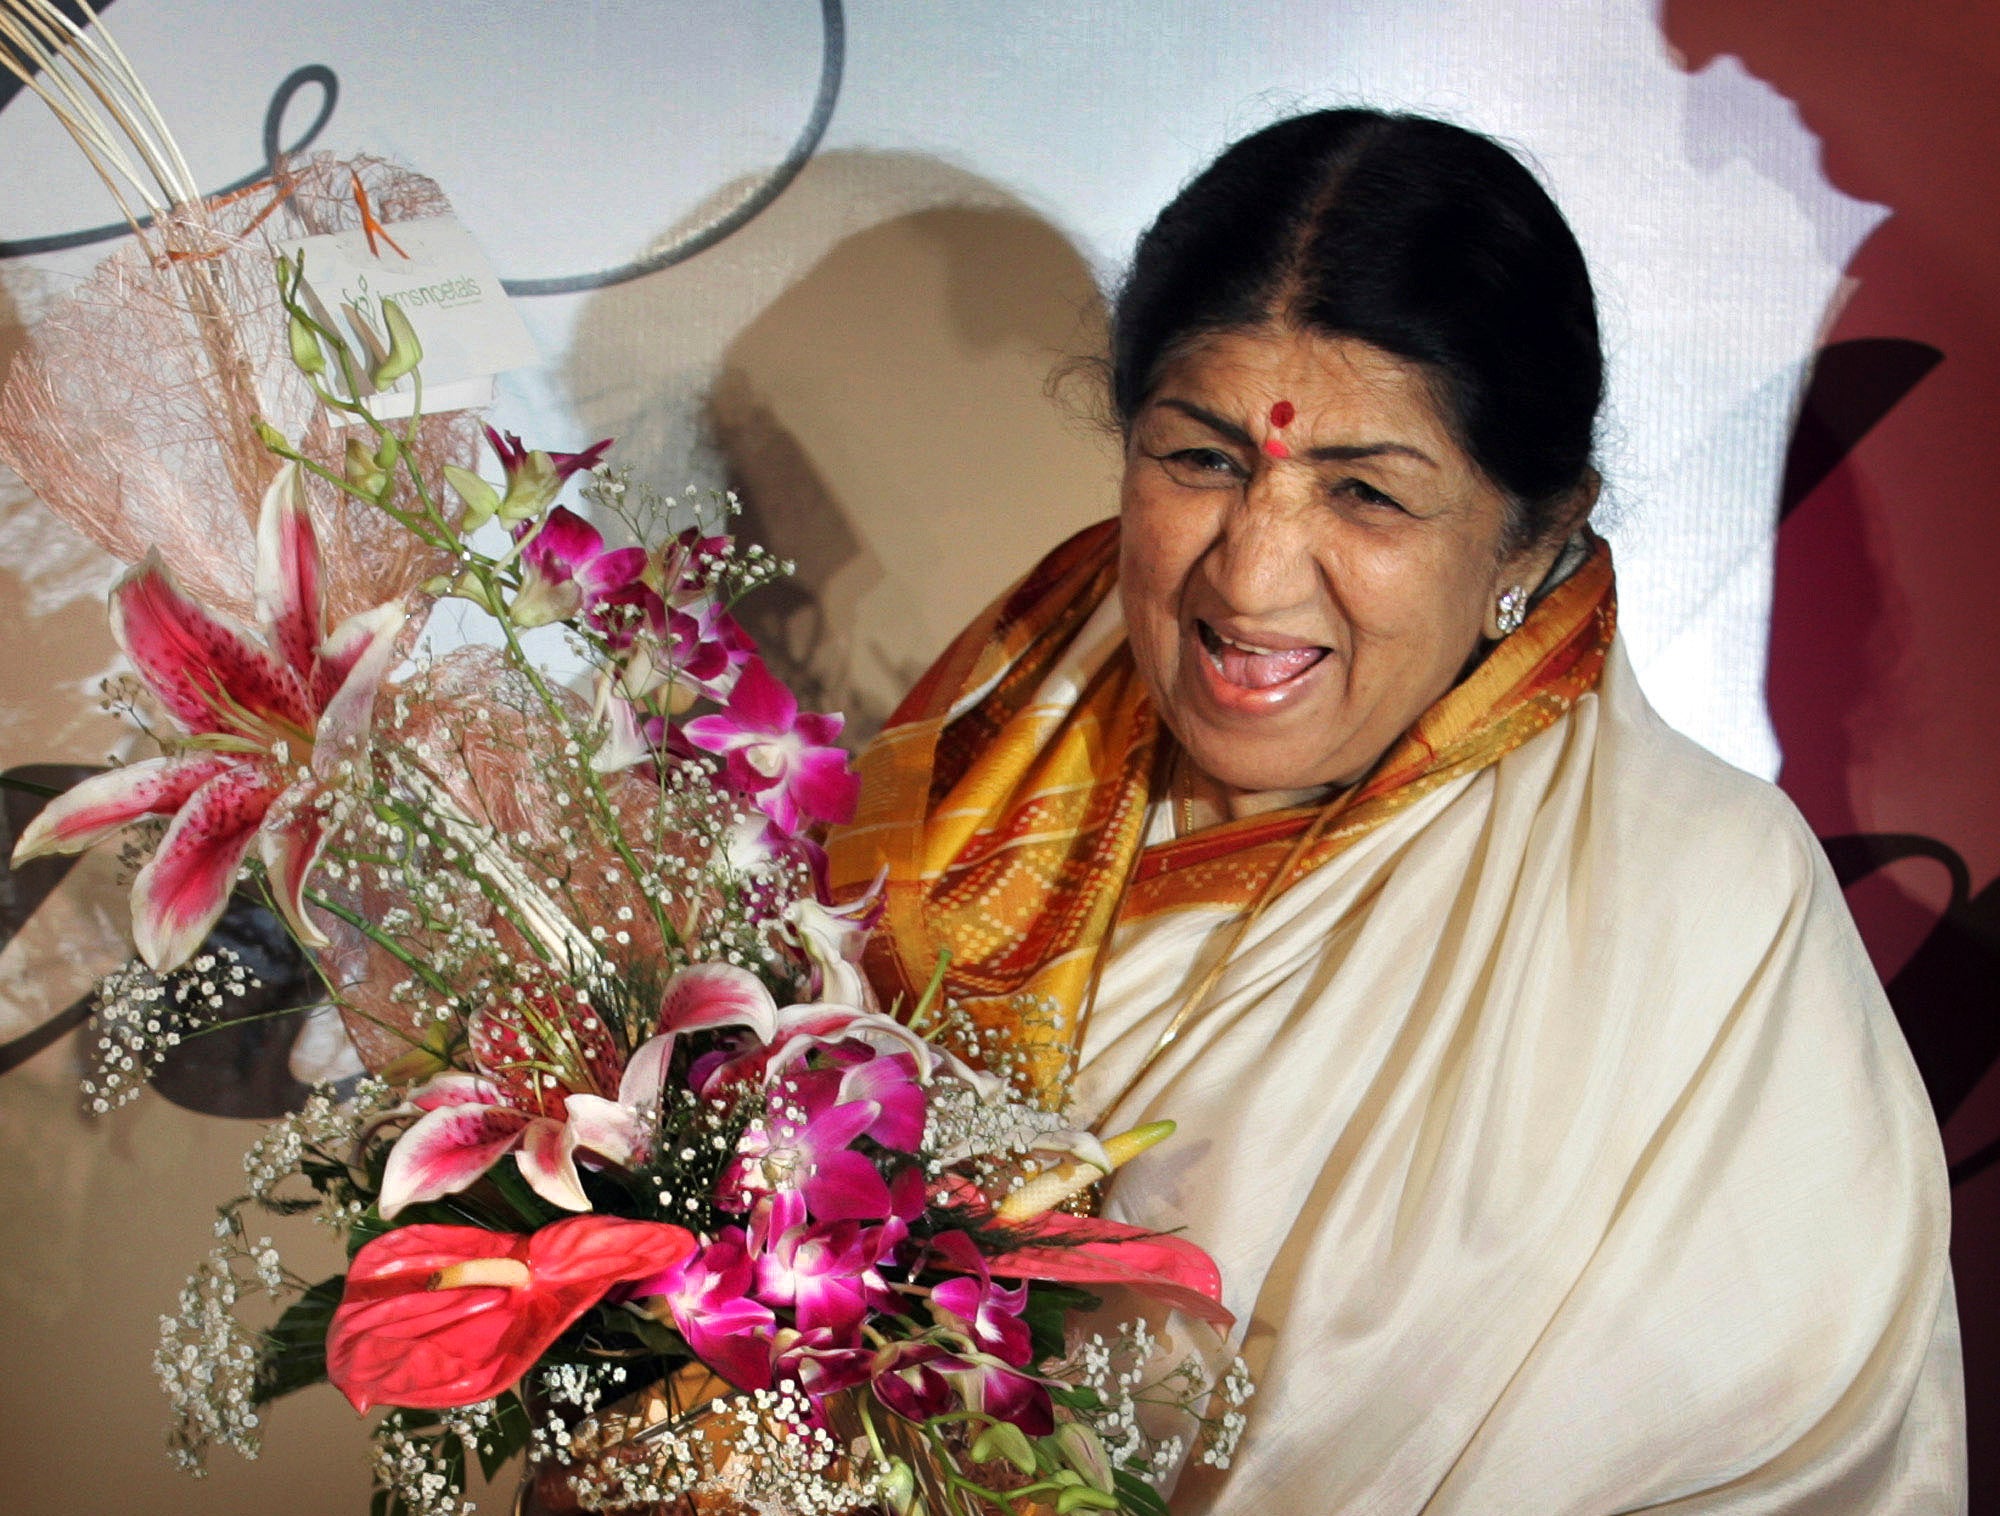 File: Lata Mangeshkar, seen here at an album launch in 2007, has died aged 92